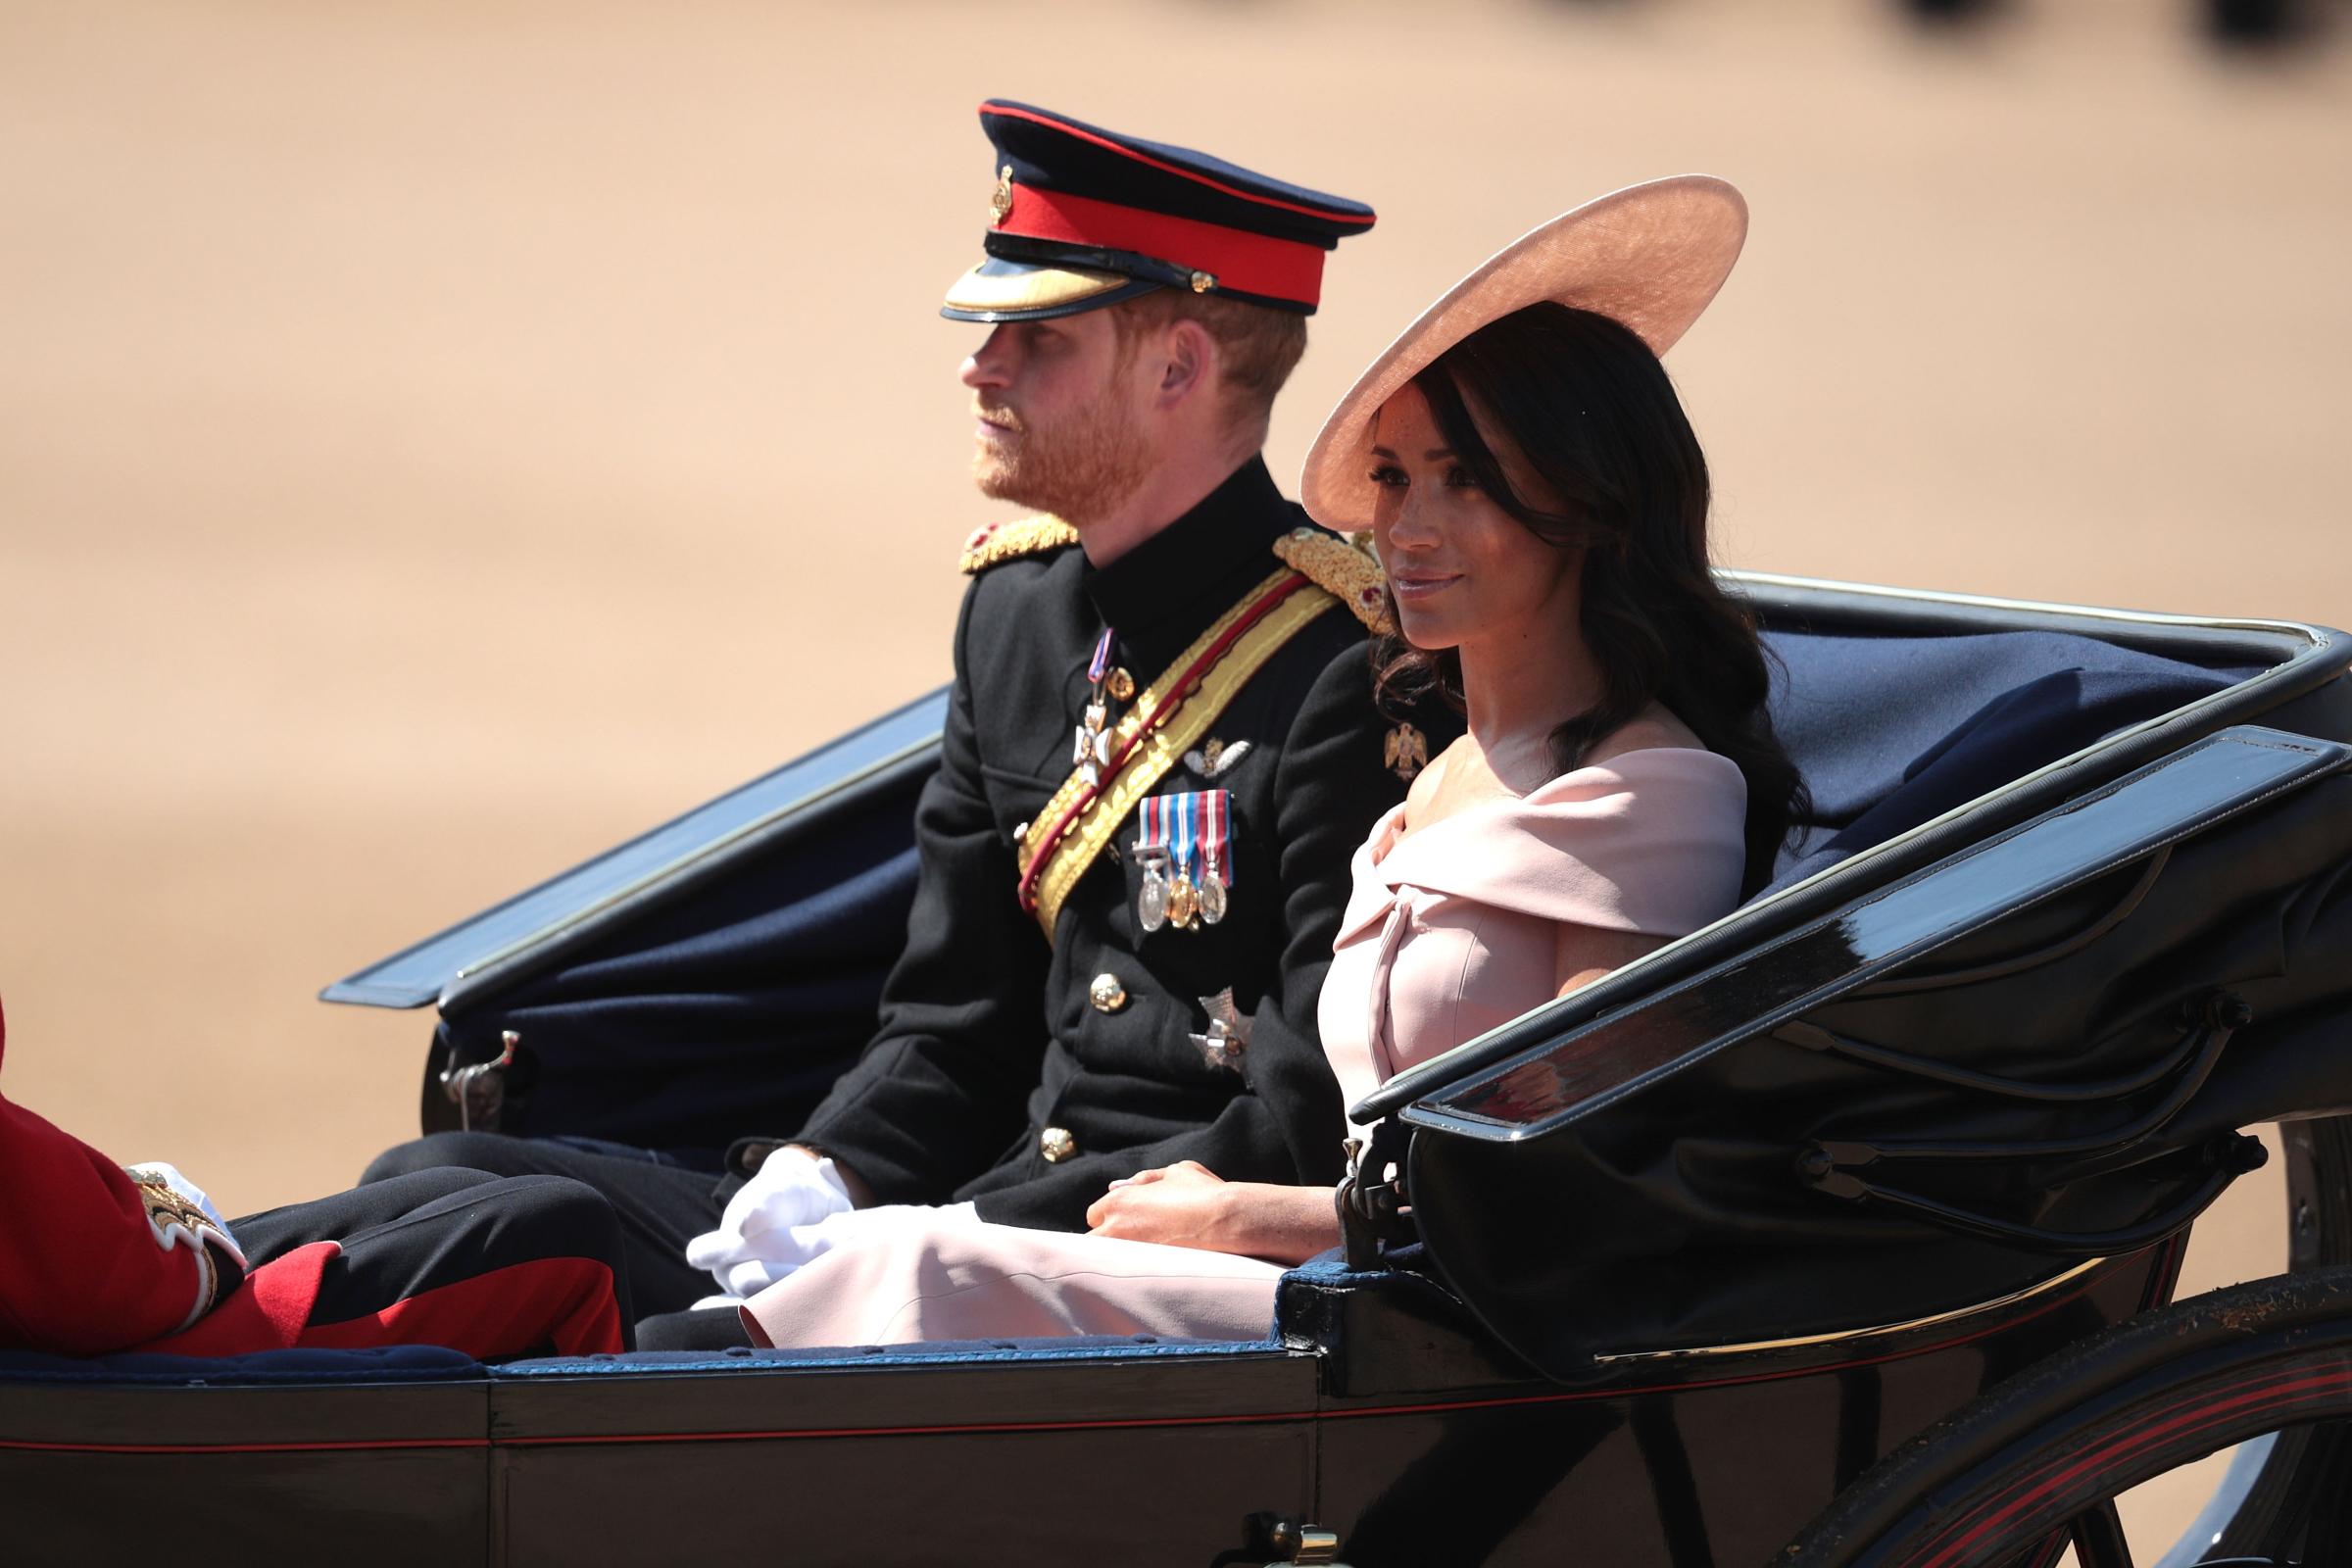 Meghan Markle and Prince Harry at Trooping the Colour